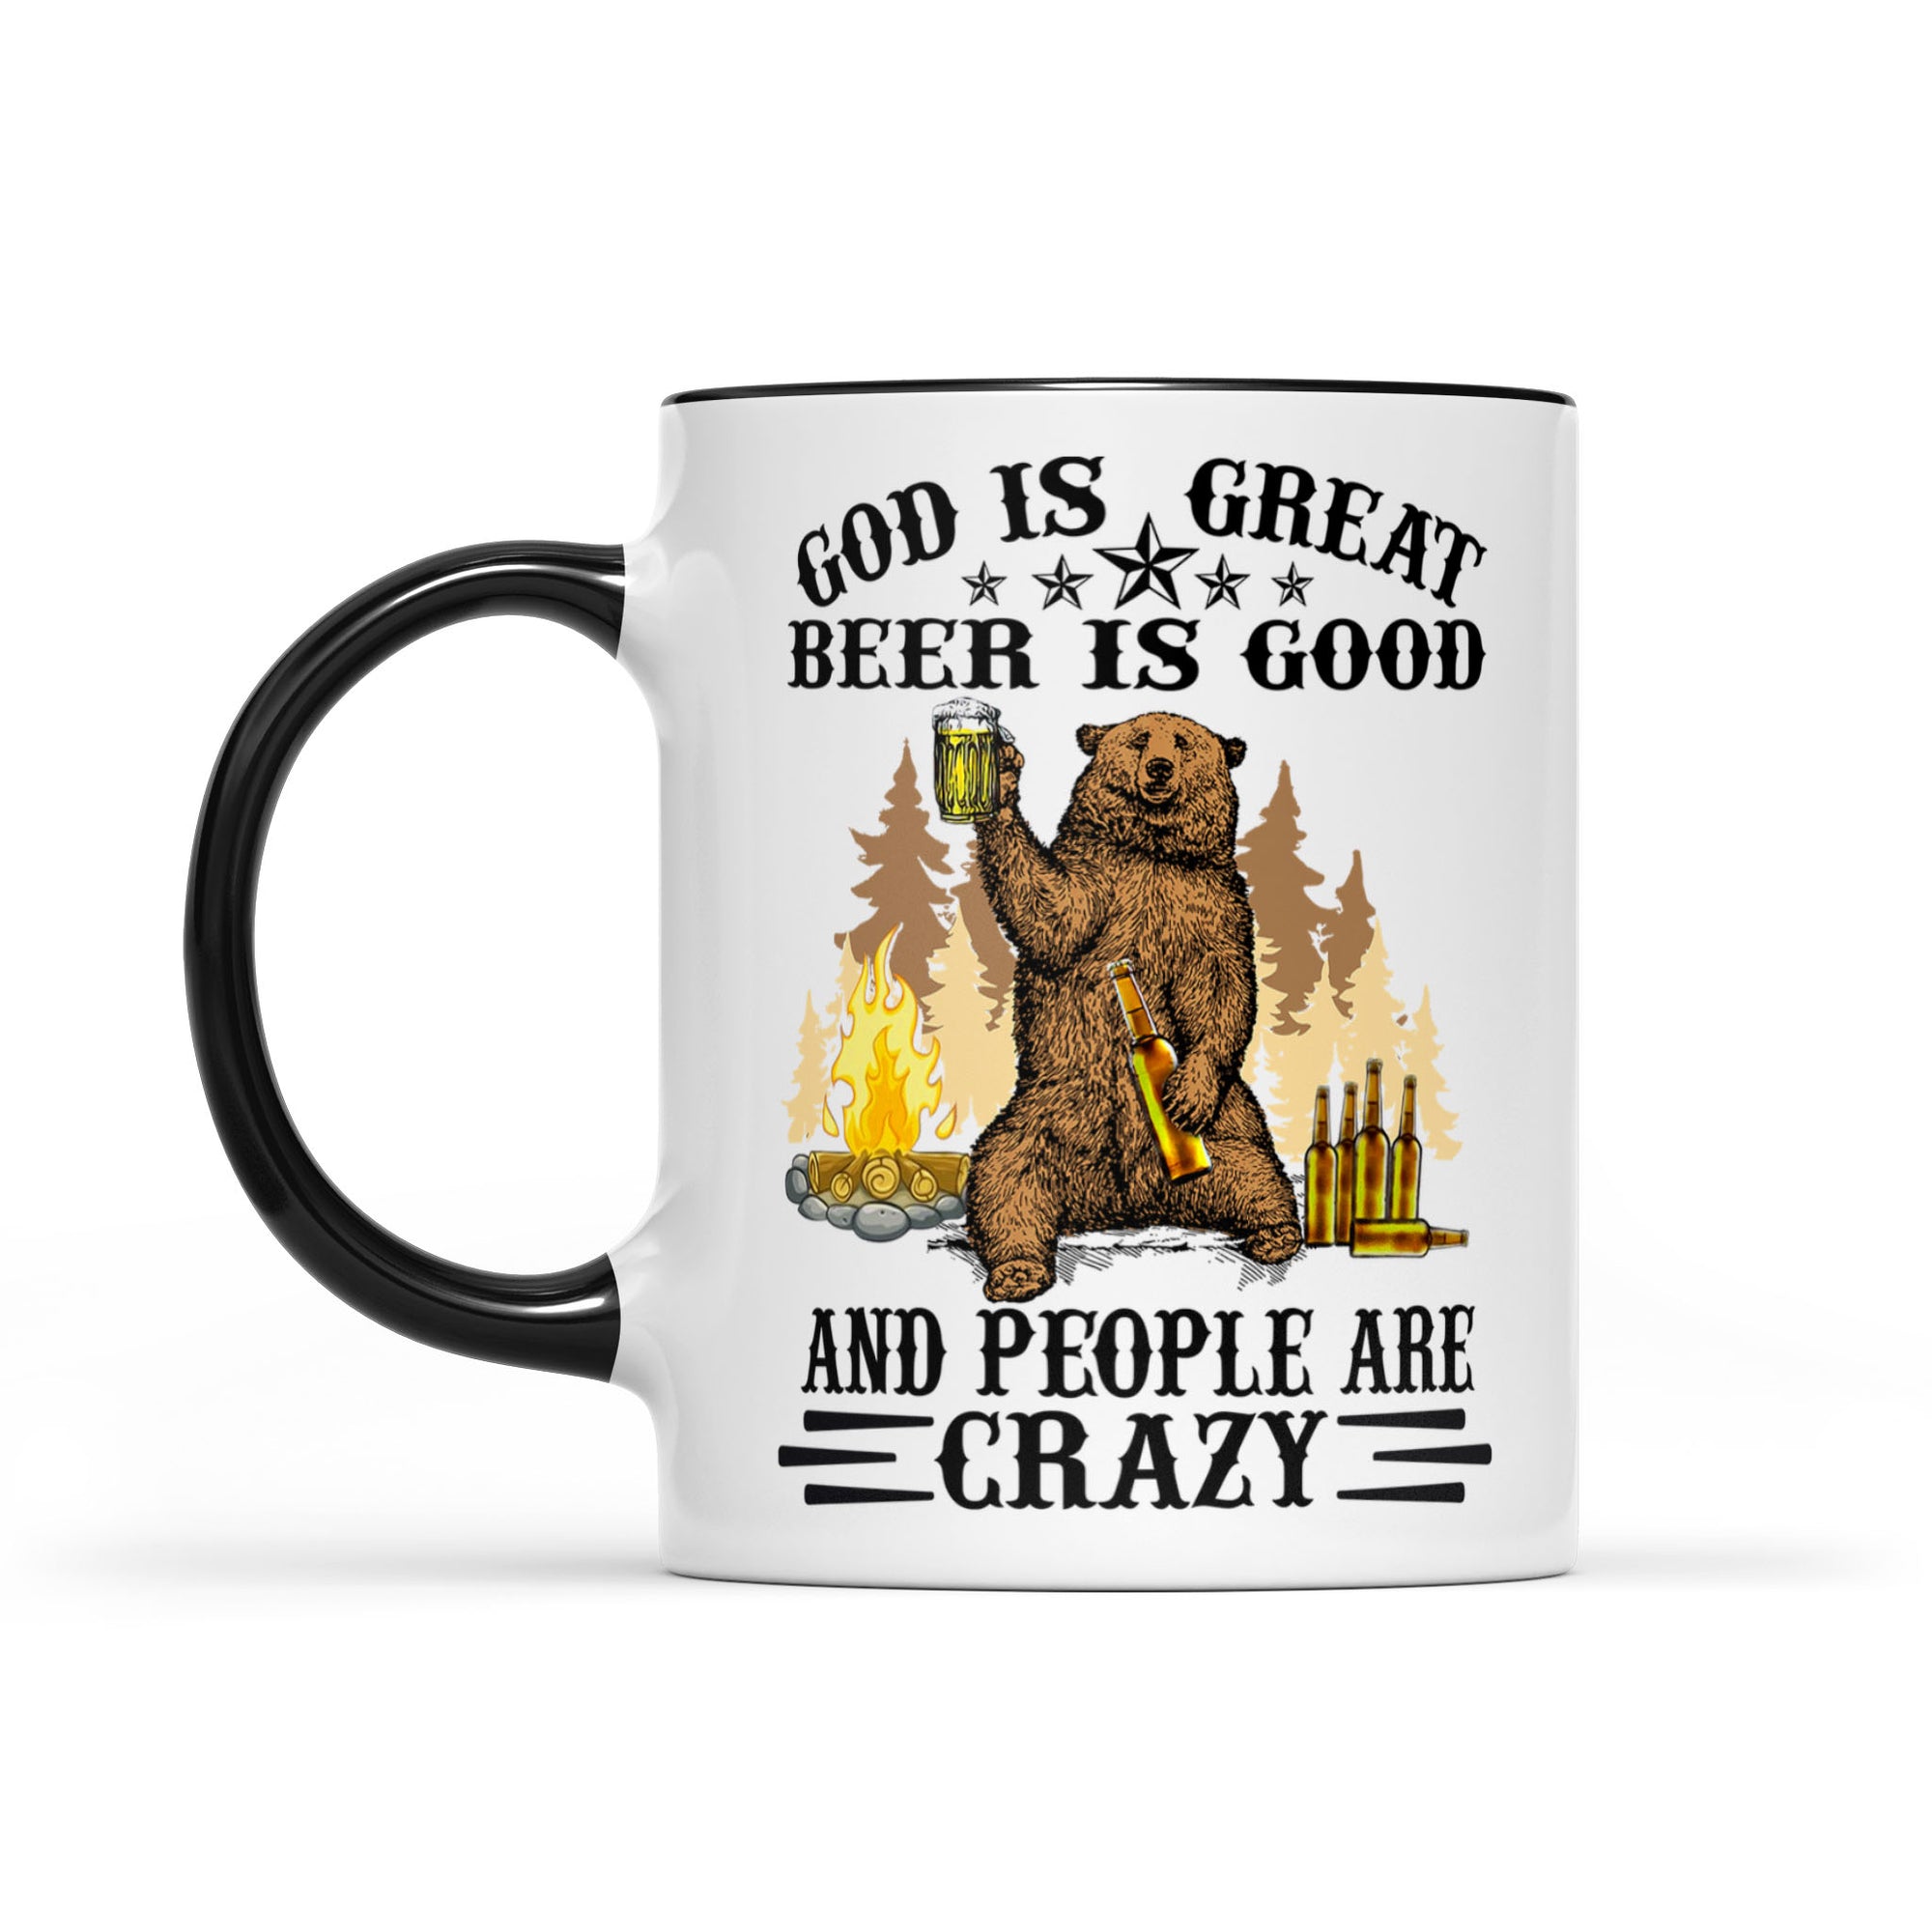 God is great beer is good and people are crazy Accent Mug